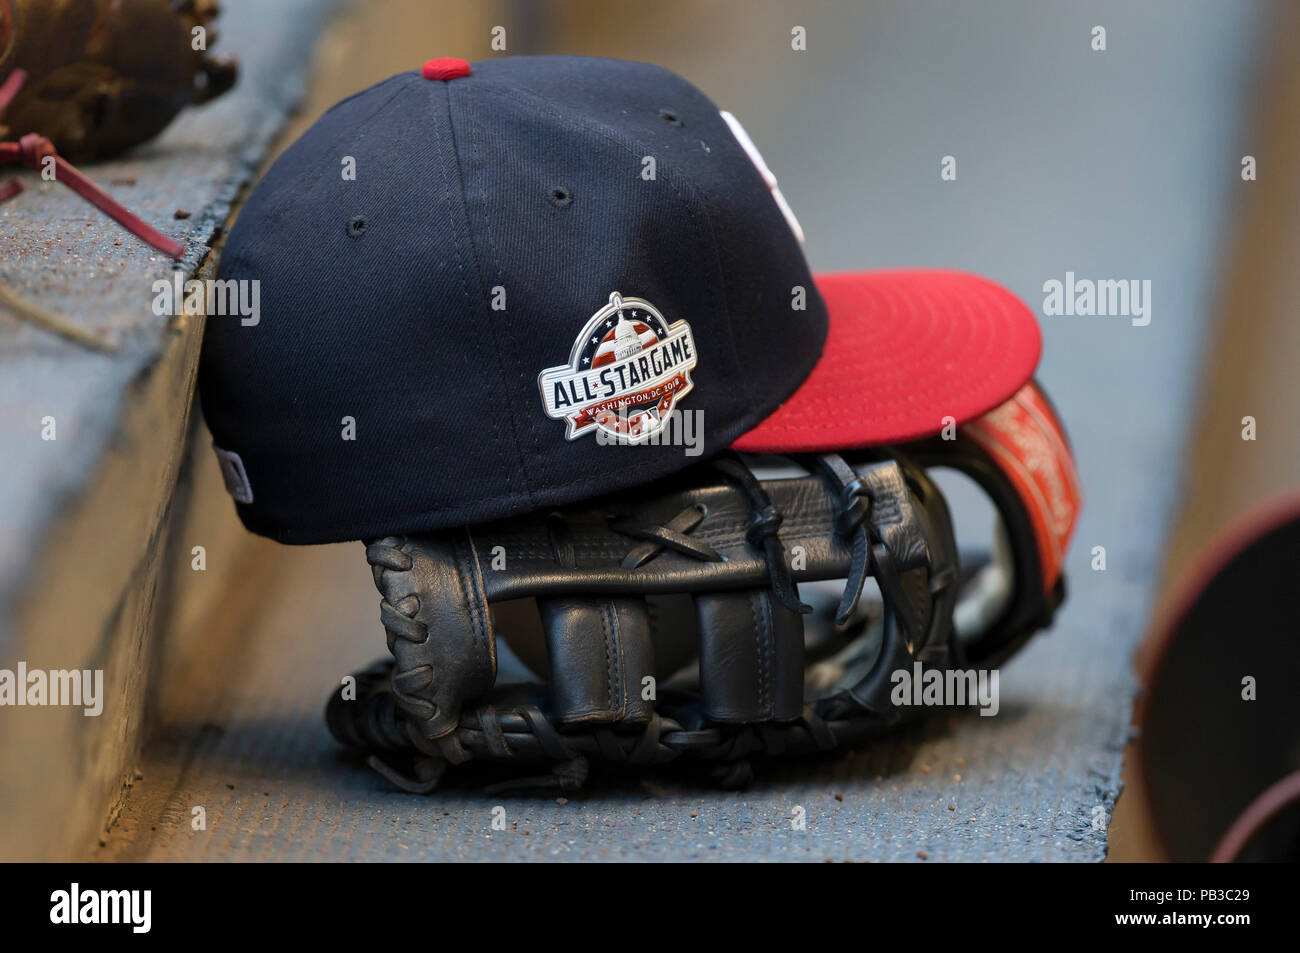 Milwaukee, WI, USA. 24th July, 2018. Washington Nationals hat displaying the All-Star logo during the Major League Baseball game between the Milwaukee Brewers and the Washington Nationals at Miller Park in Milwaukee, WI. John Fisher/CSM/Alamy Live News Stock Photo